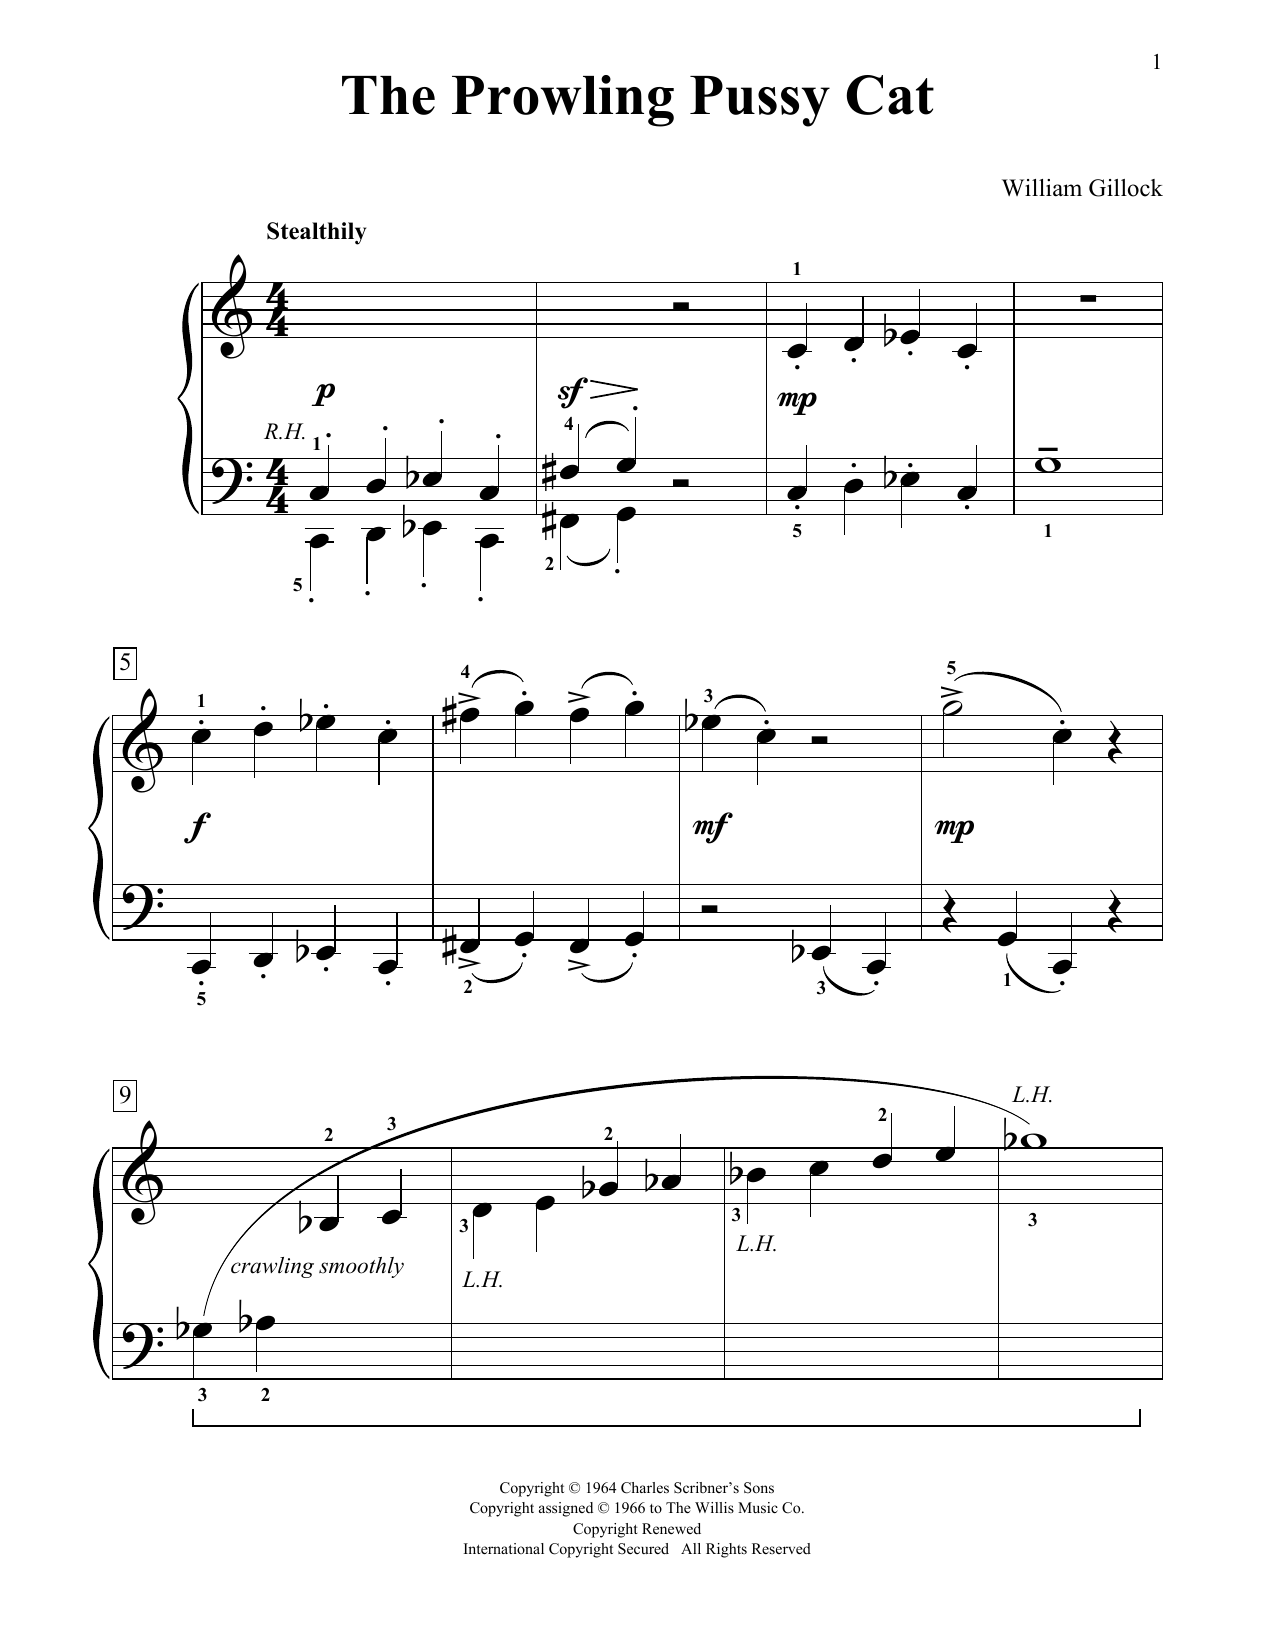 Download William Gillock The Prowling Pussy Cat Sheet Music